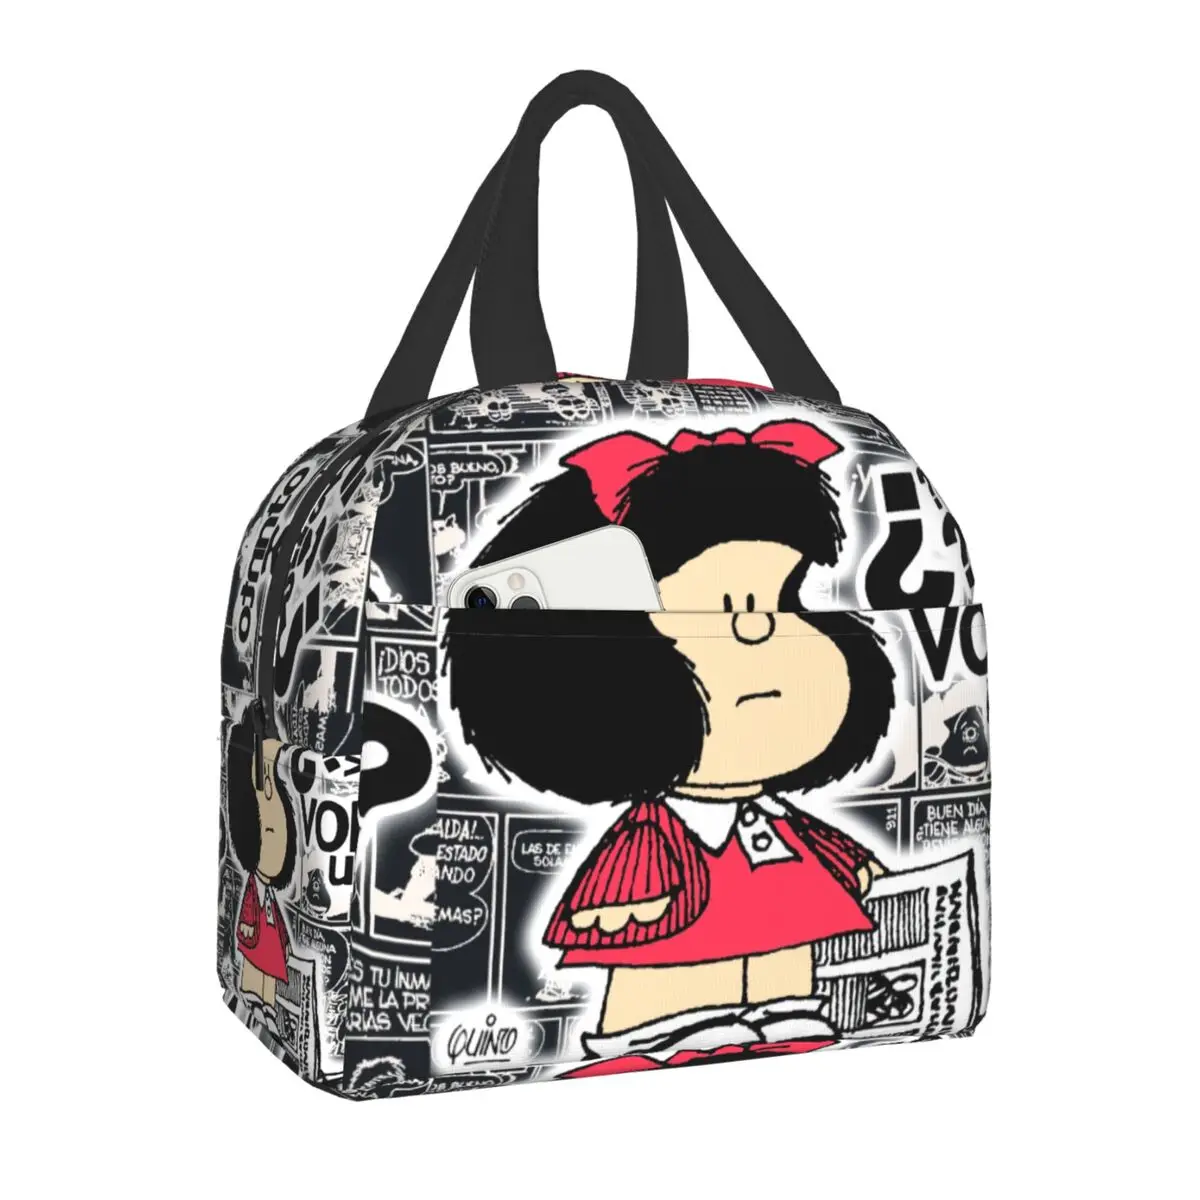 

Vintage Quino Comic Mafalda Insulated Lunch Bag for Women Portable Cartoon Mang Thermal Cooler Lunch Box Office Picnic Travel